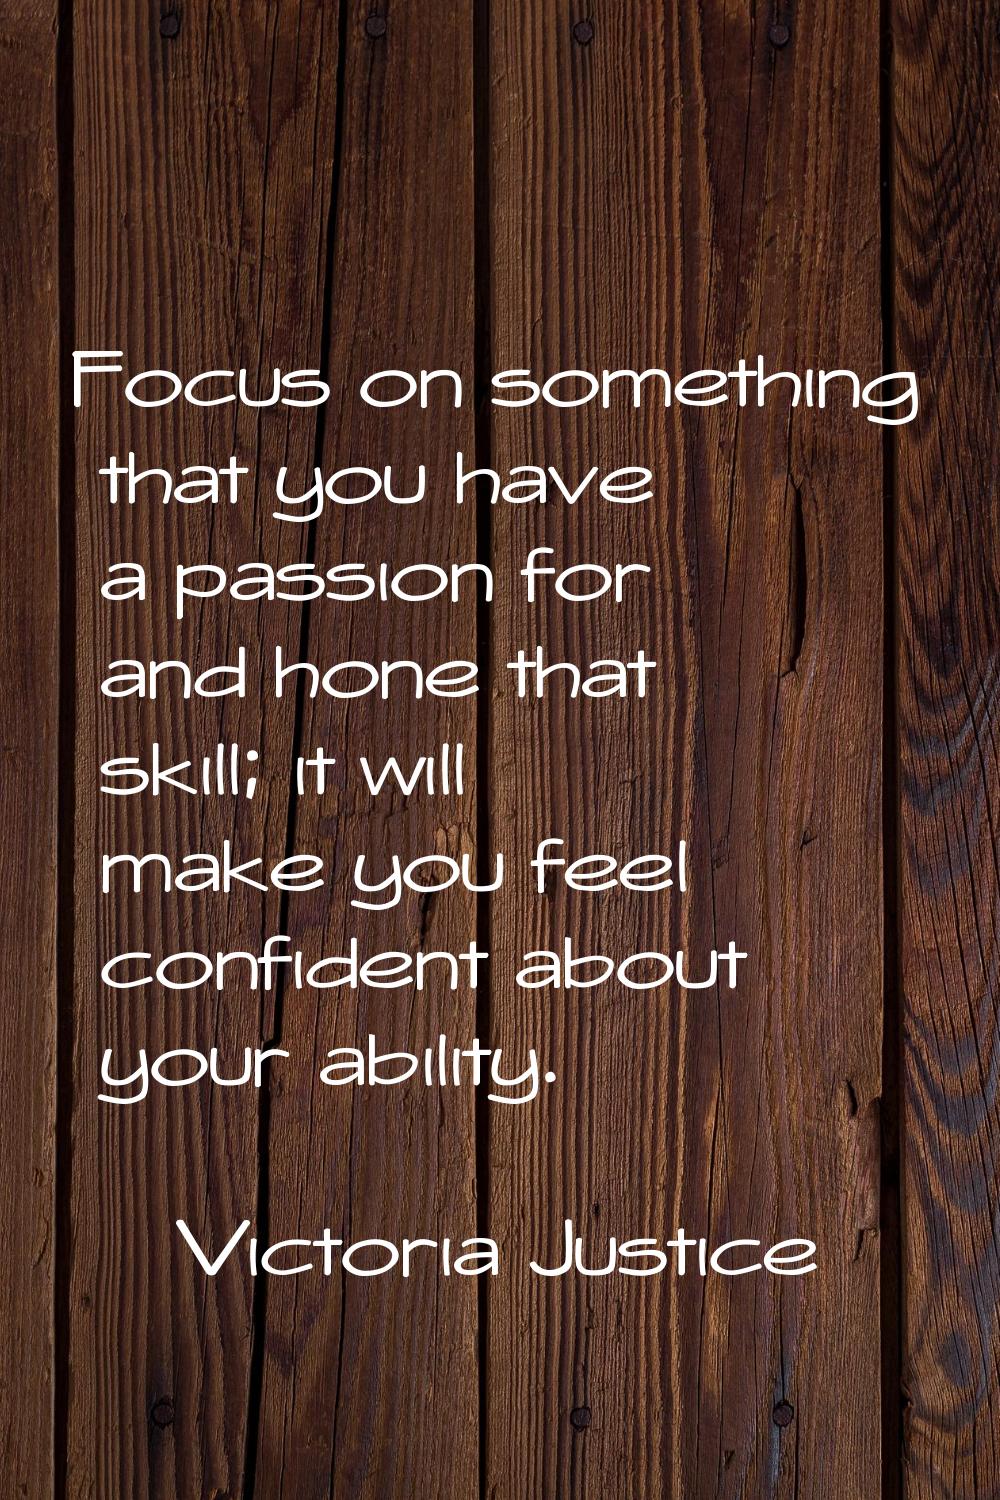 Focus on something that you have a passion for and hone that skill; it will make you feel confident